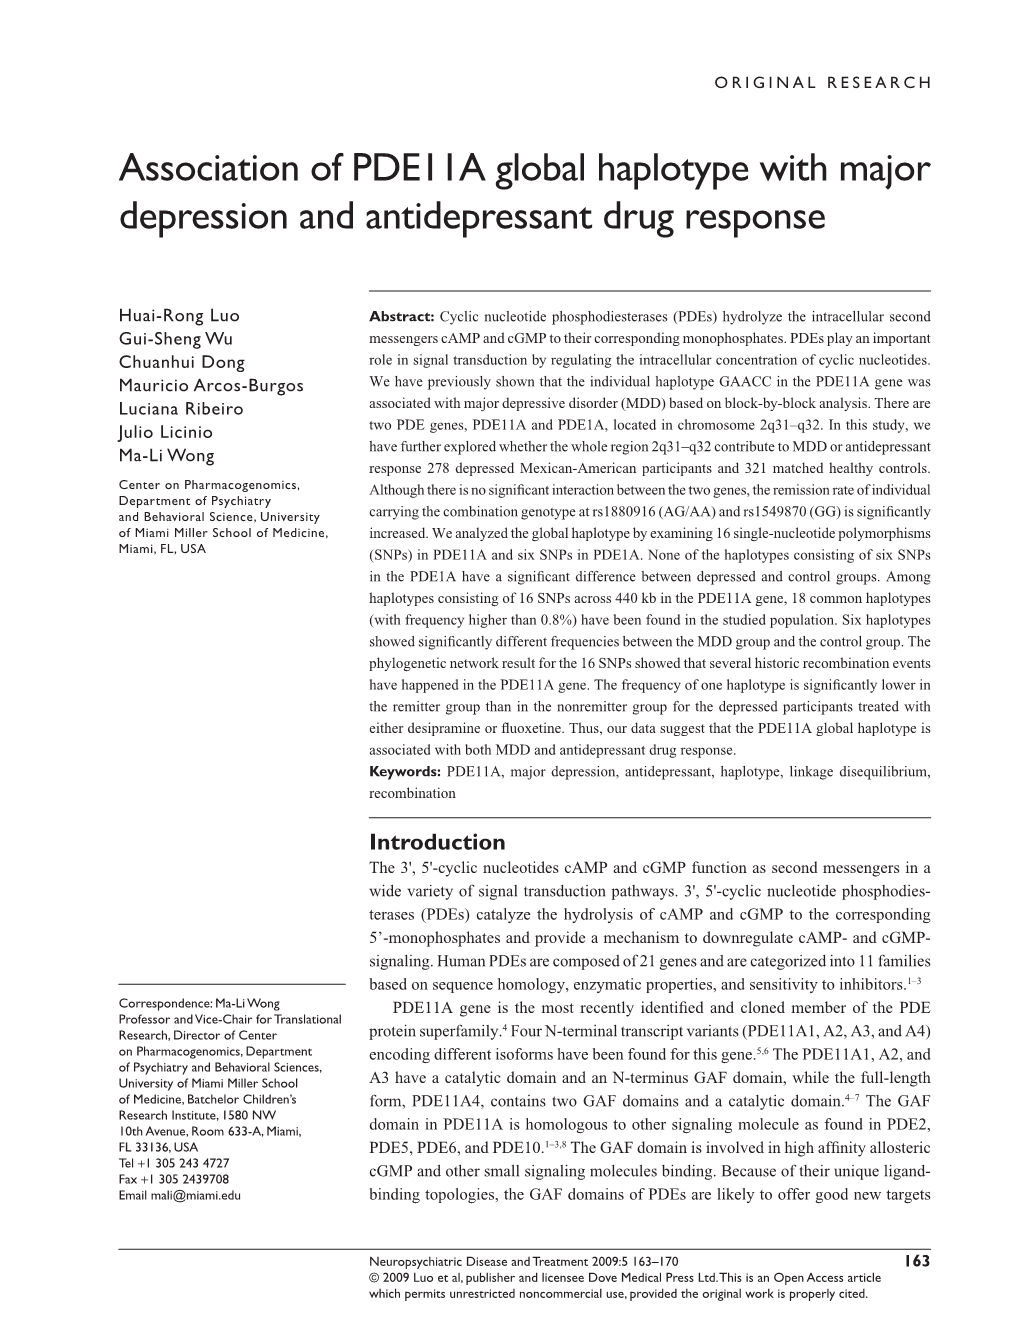 Association of PDE11A Global Haplotype with Major Depression and Antidepressant Drug Response